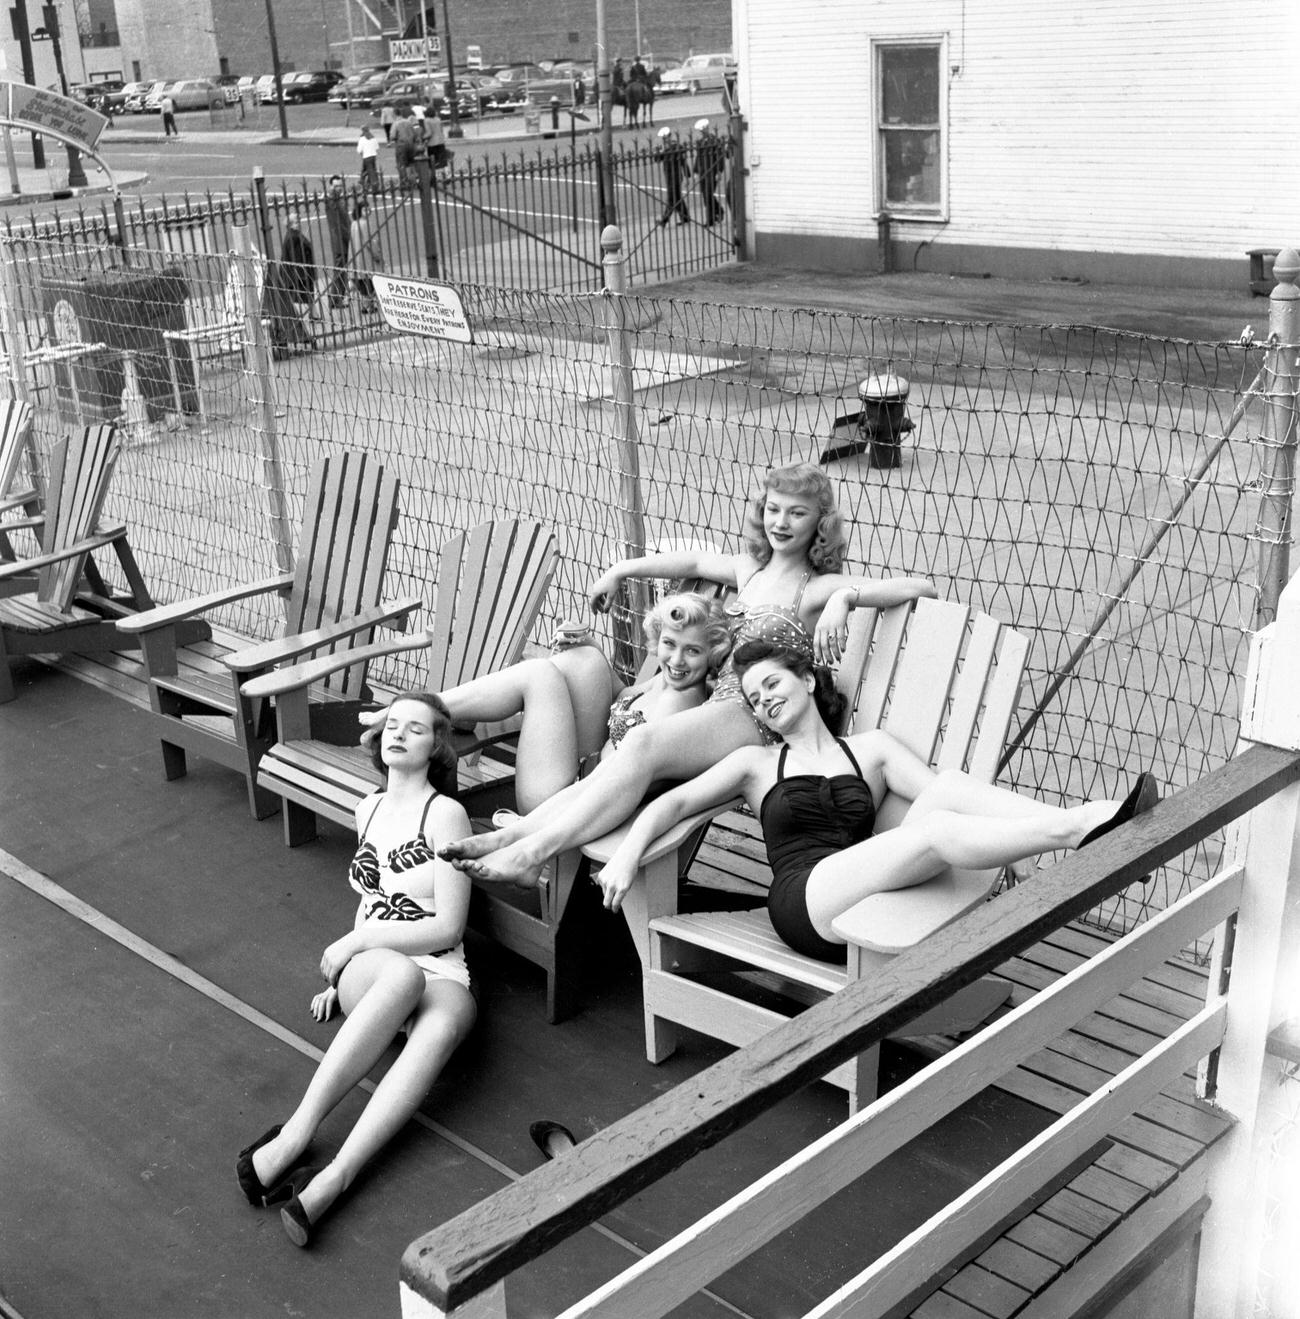 Cbs Models Lounging At Steeplechase Park Pool, Coney Island, Brooklyn, 1953.